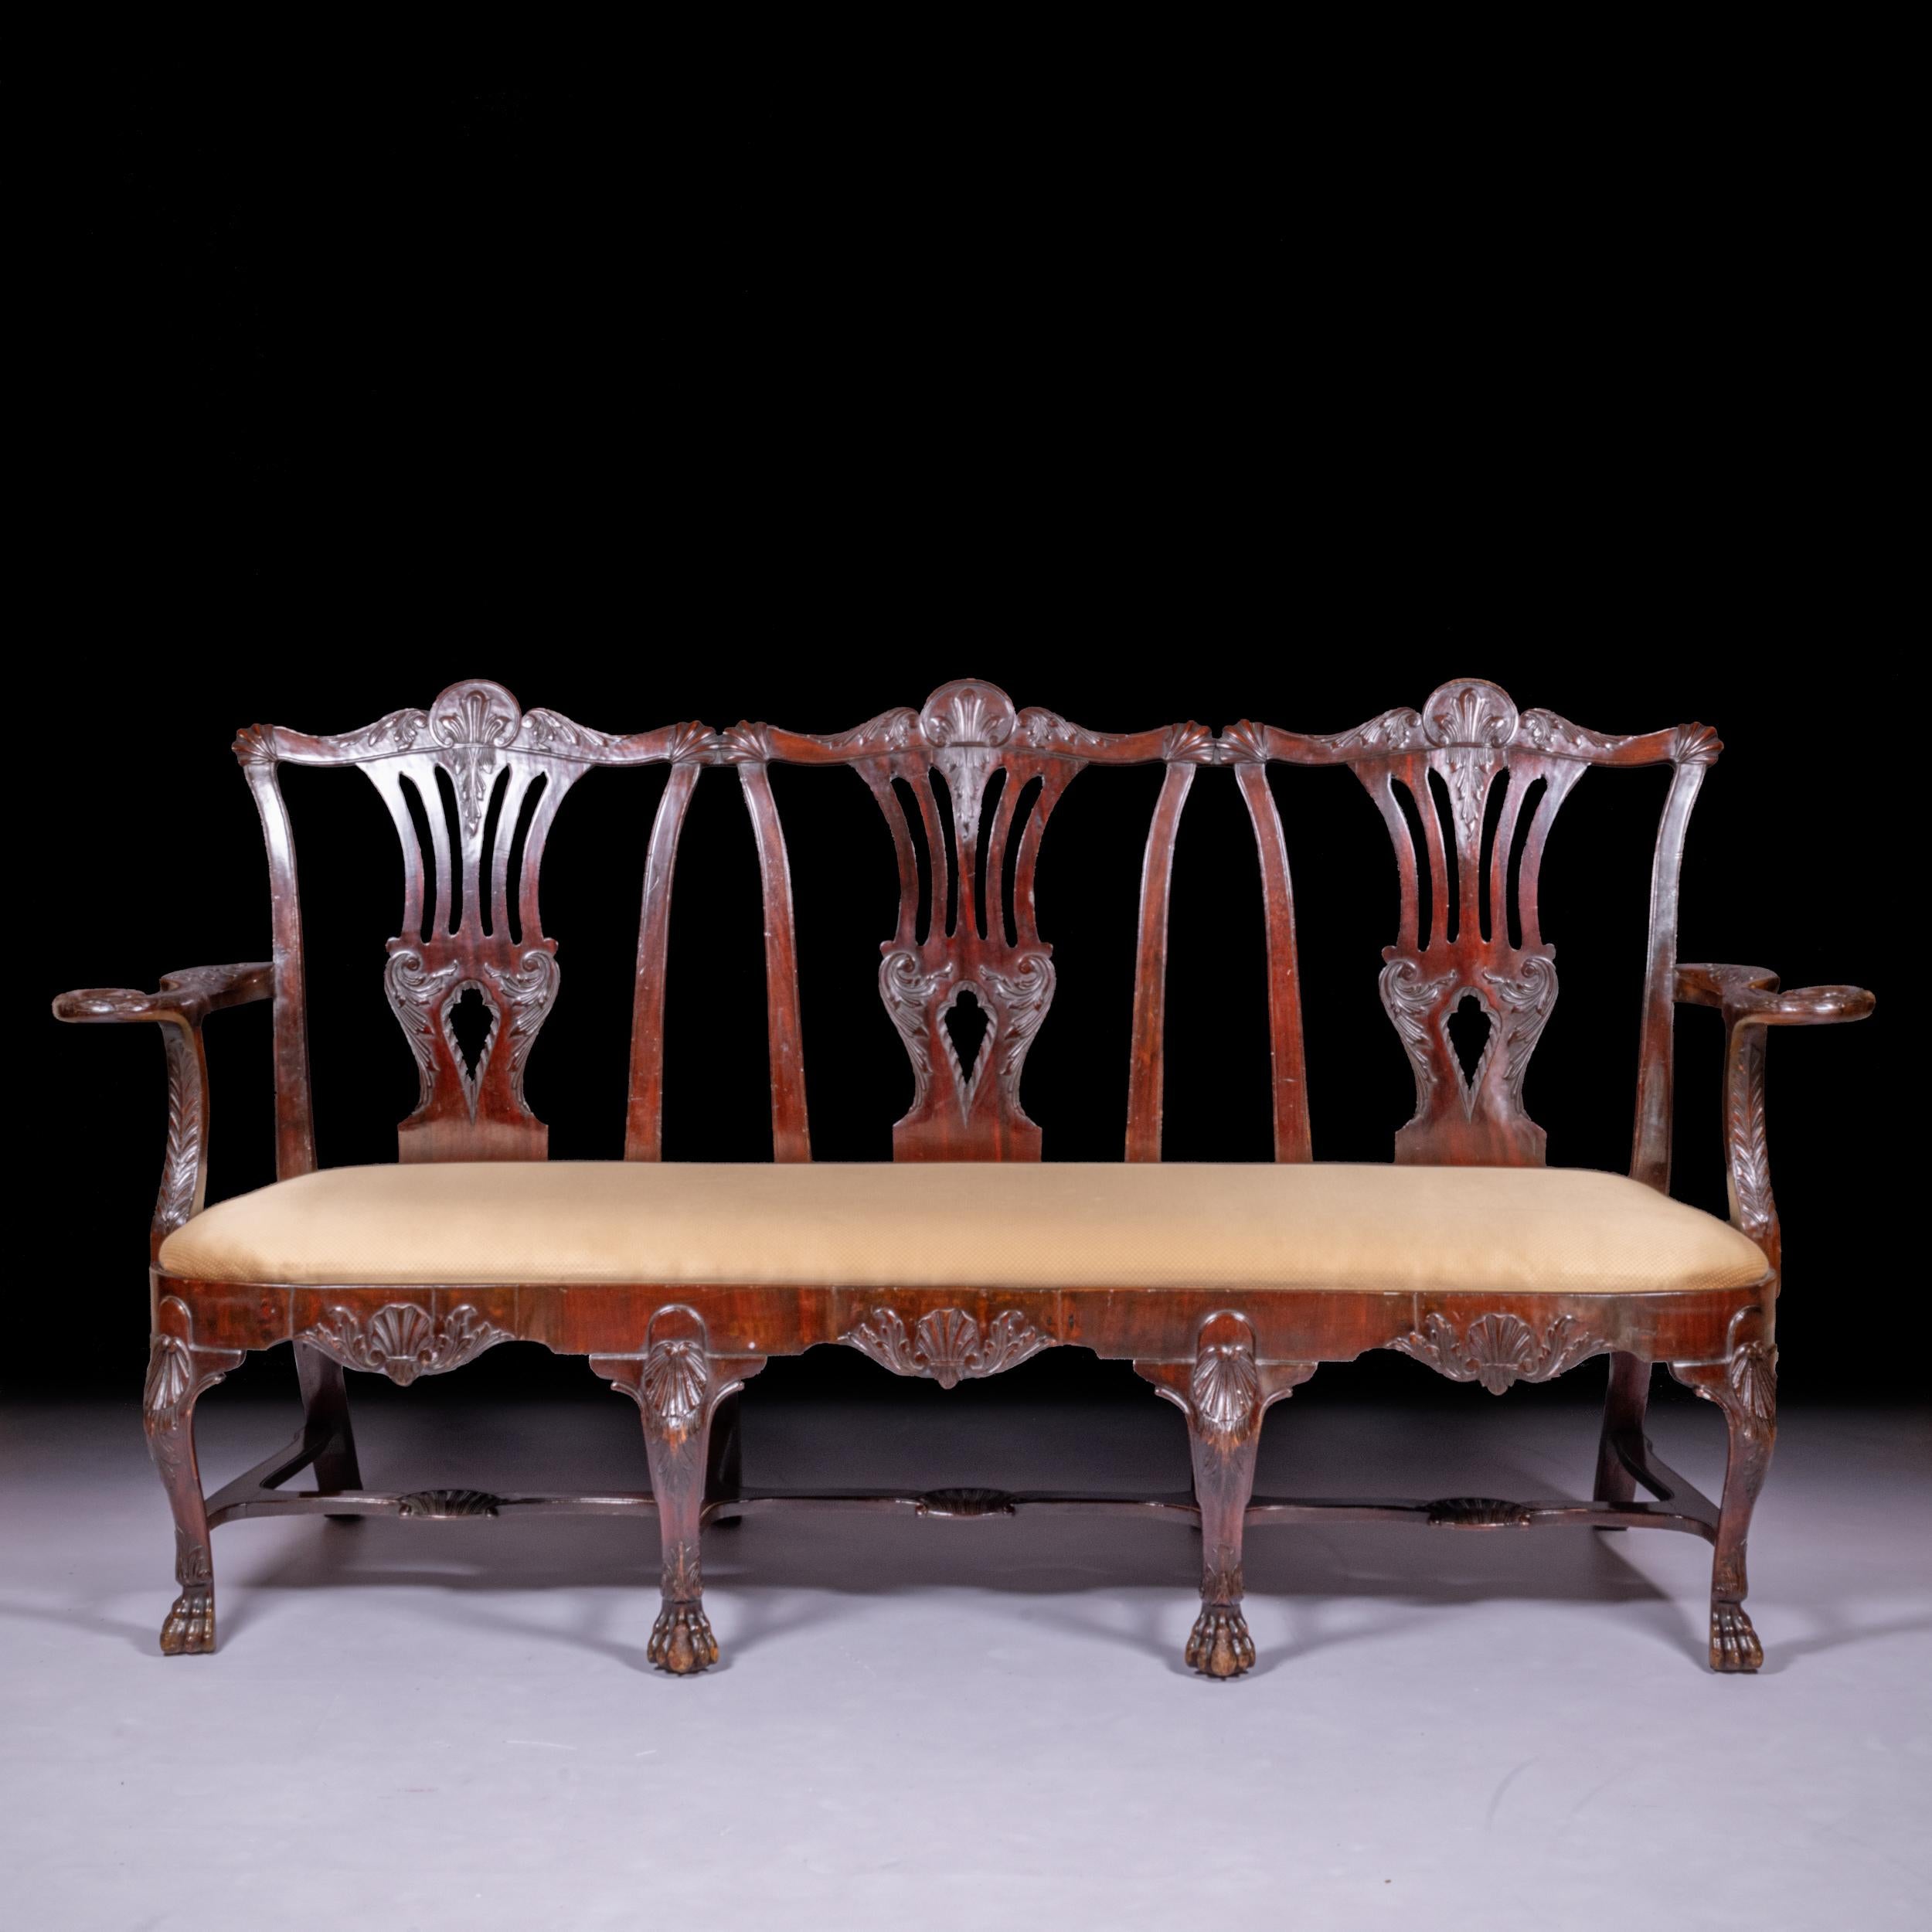 Mahogany 19th Century Irish George III Style Triple Chair Back Settee by Butler of Dublin For Sale